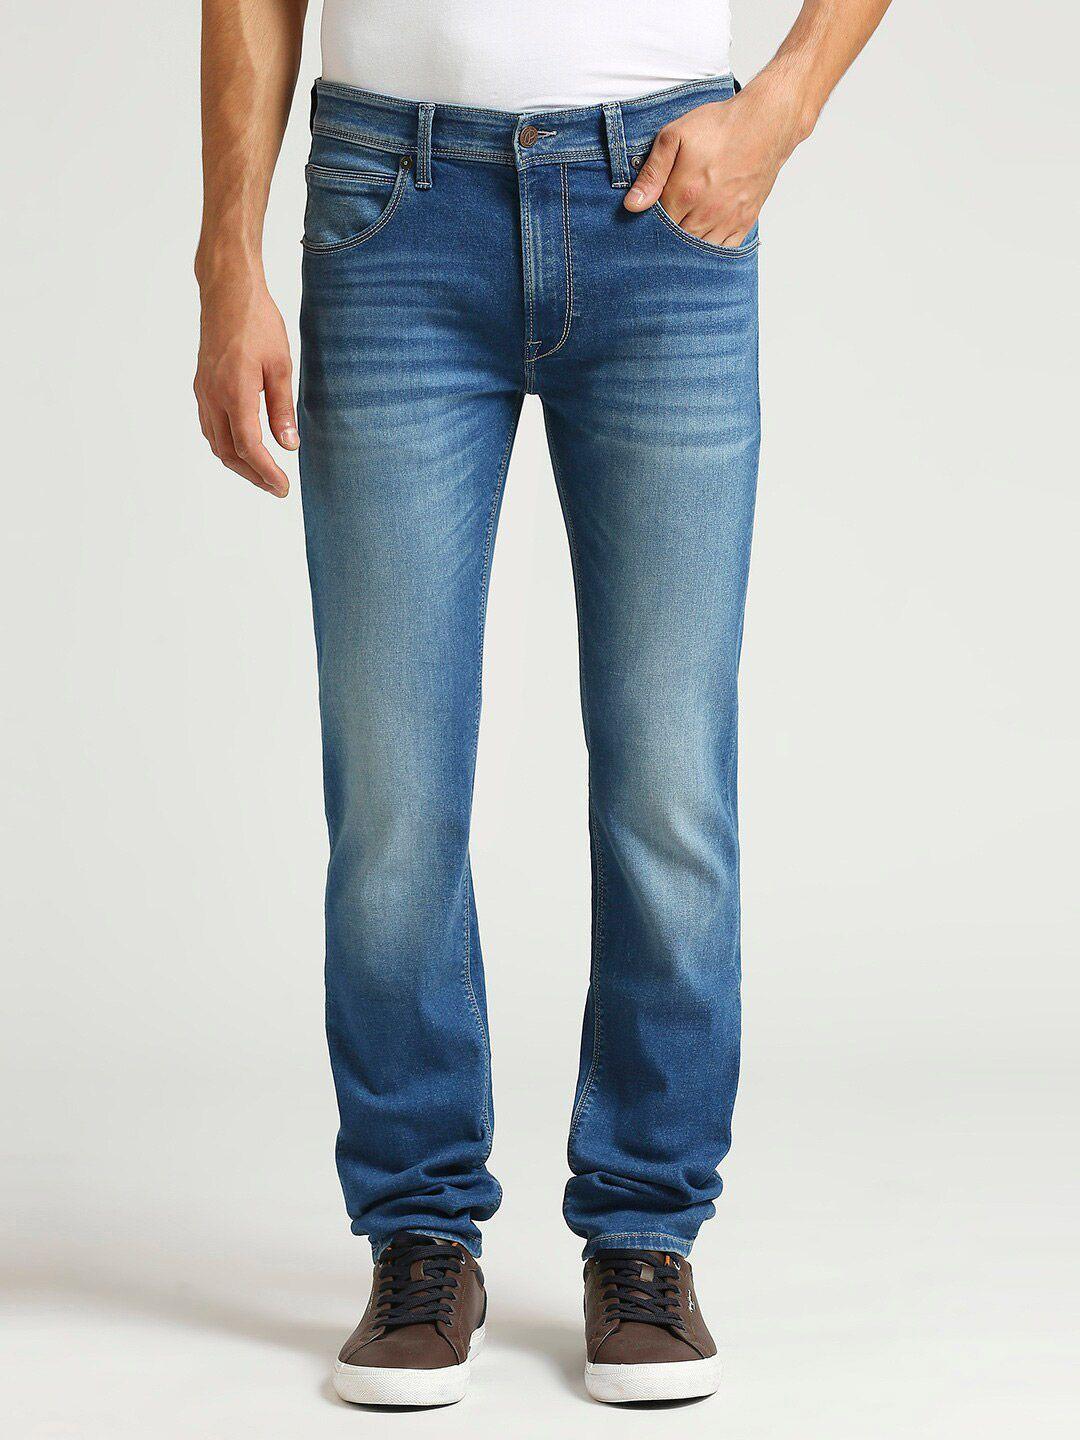 pepe jeans men slim fit clean look stretchable jeans